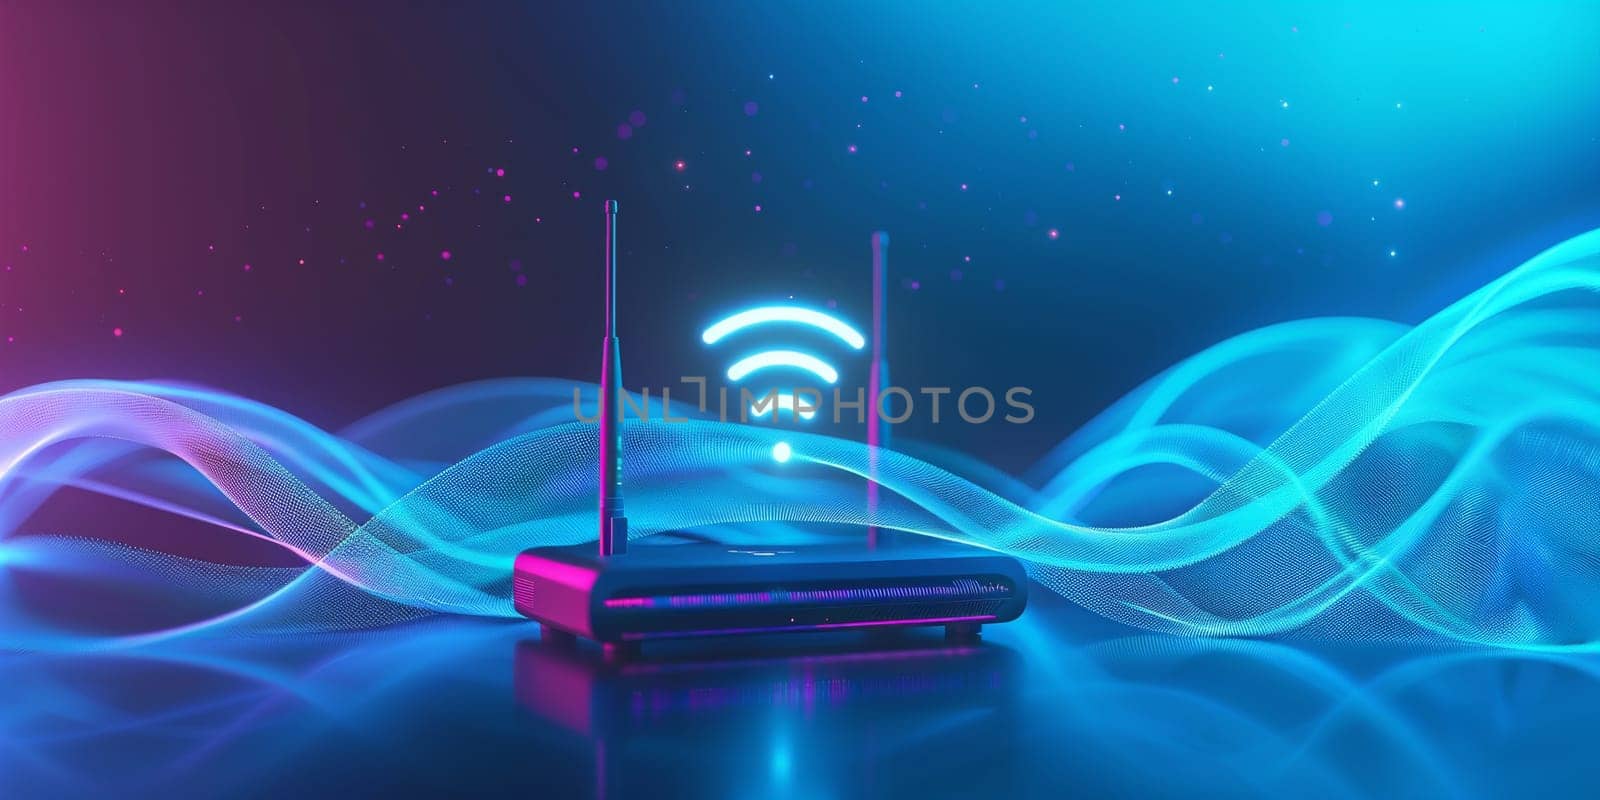 Icon wifi over the router isolated on blue and pink abstract background, internet networking concept by Kadula